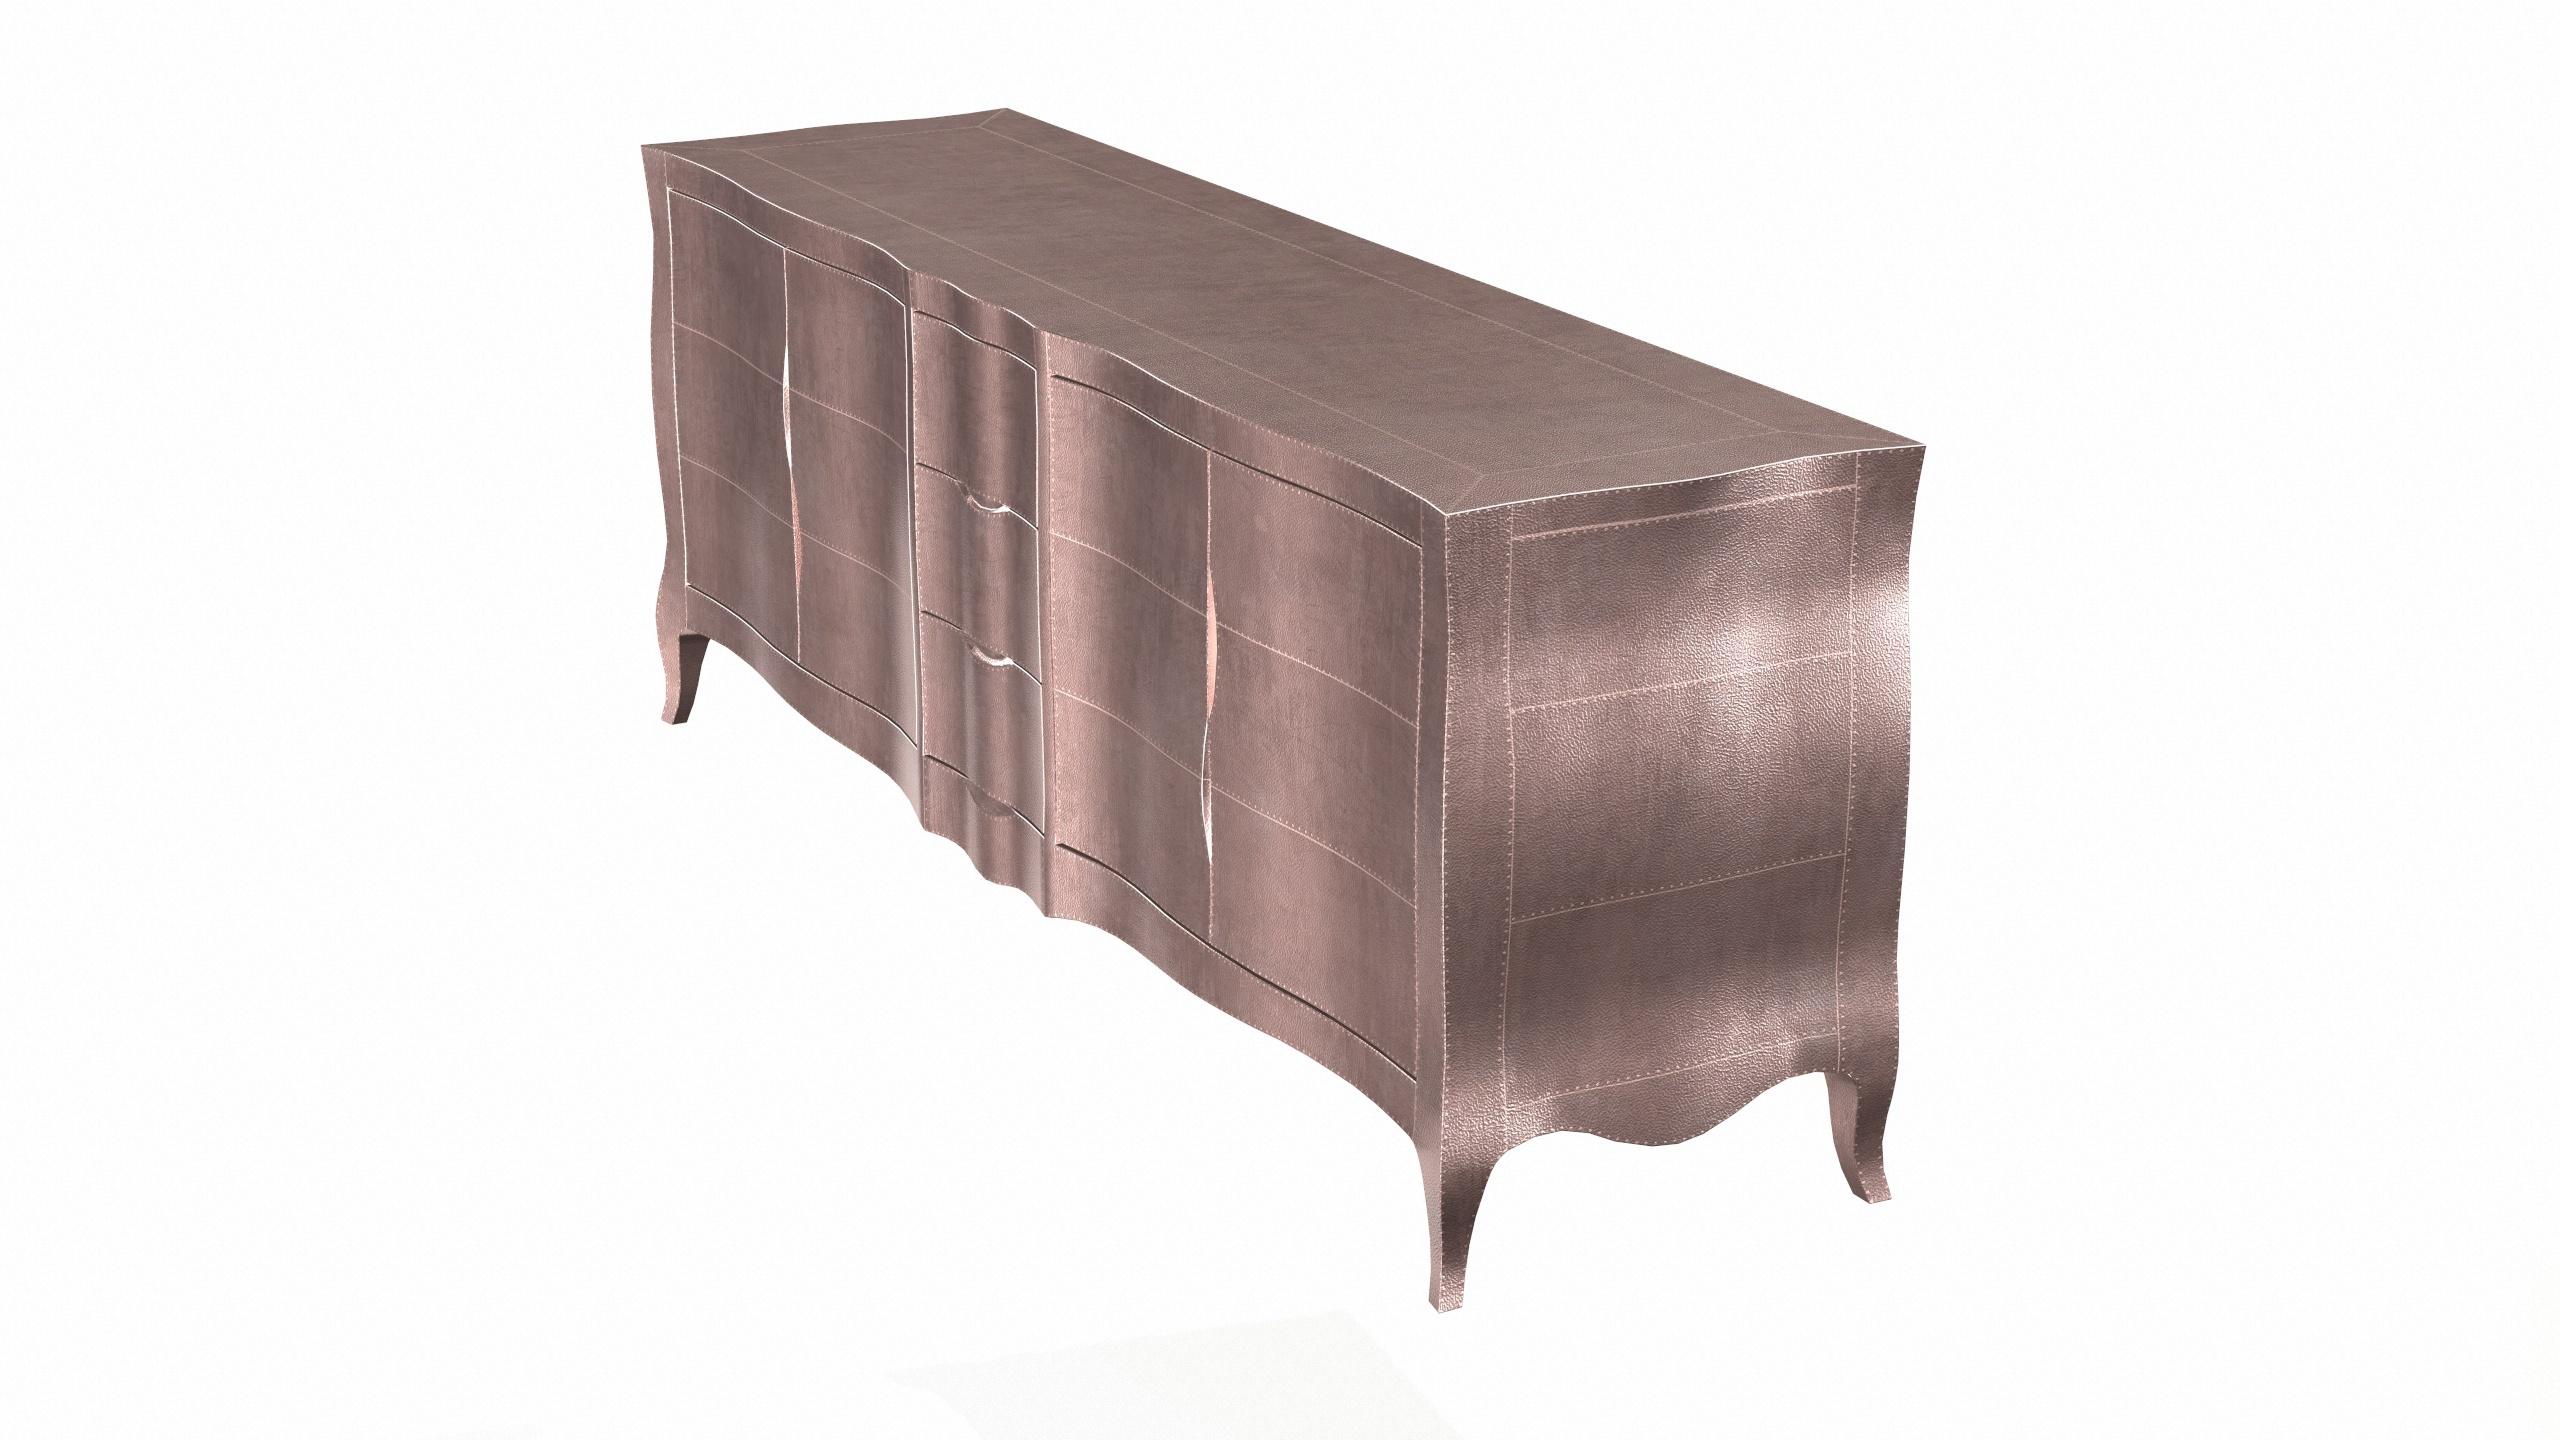 Hand-Carved Louise Credenza Art Deco Sideboards in Fine Hammered Copper by Paul Mathieu For Sale